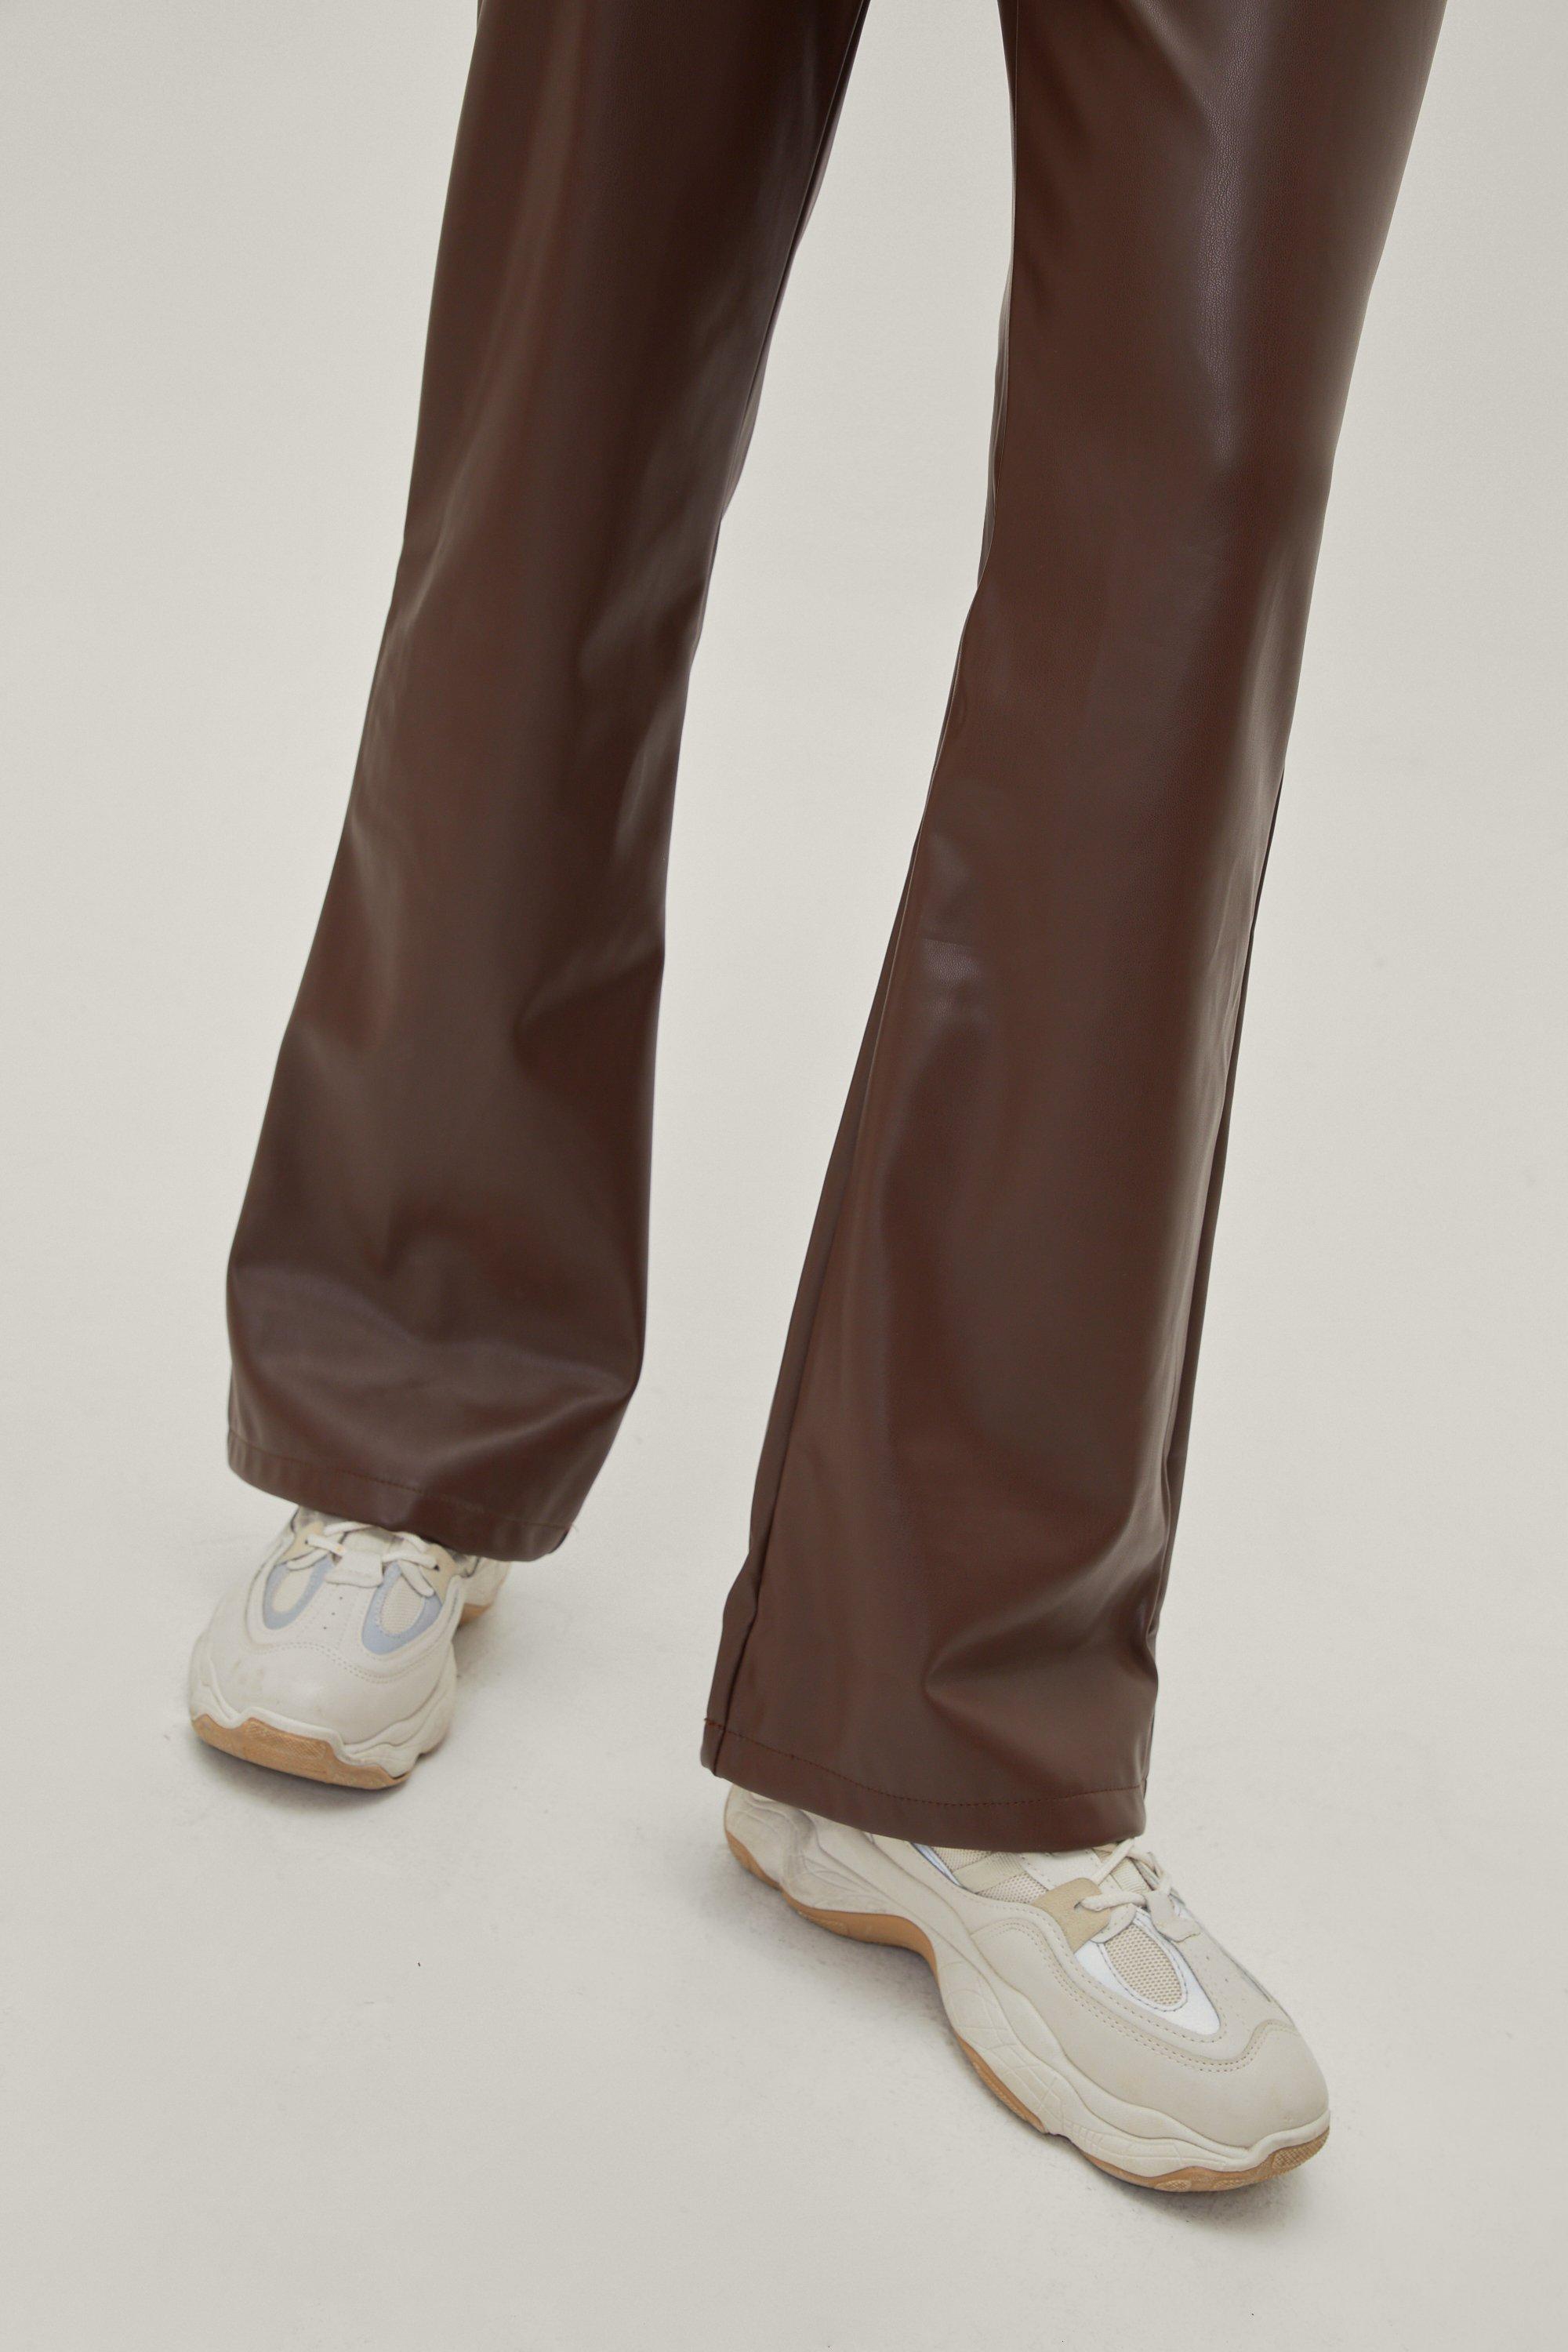 Low-rise flared faux leather pants in brown - Rotate